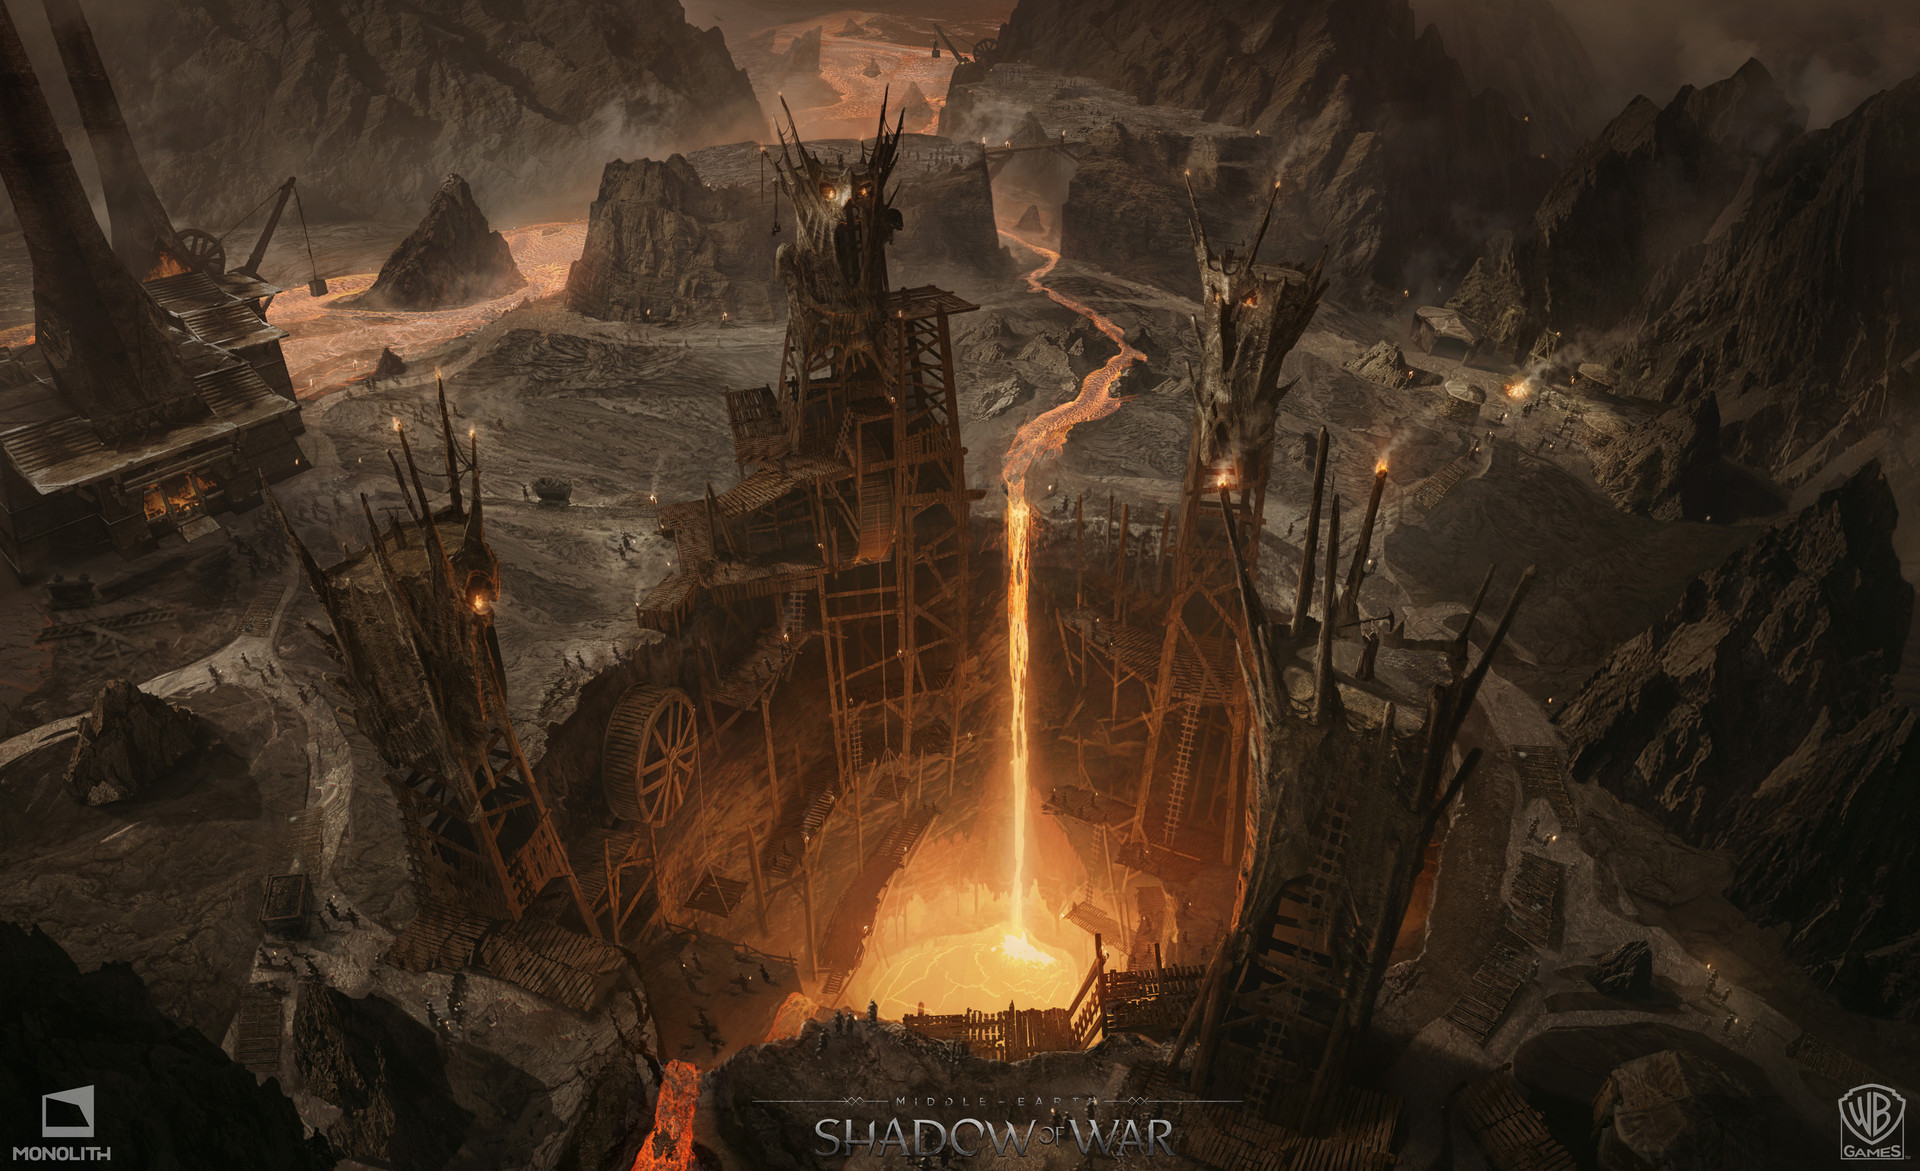 Middle-earth: Shadow of War Concept Art by George Rushing